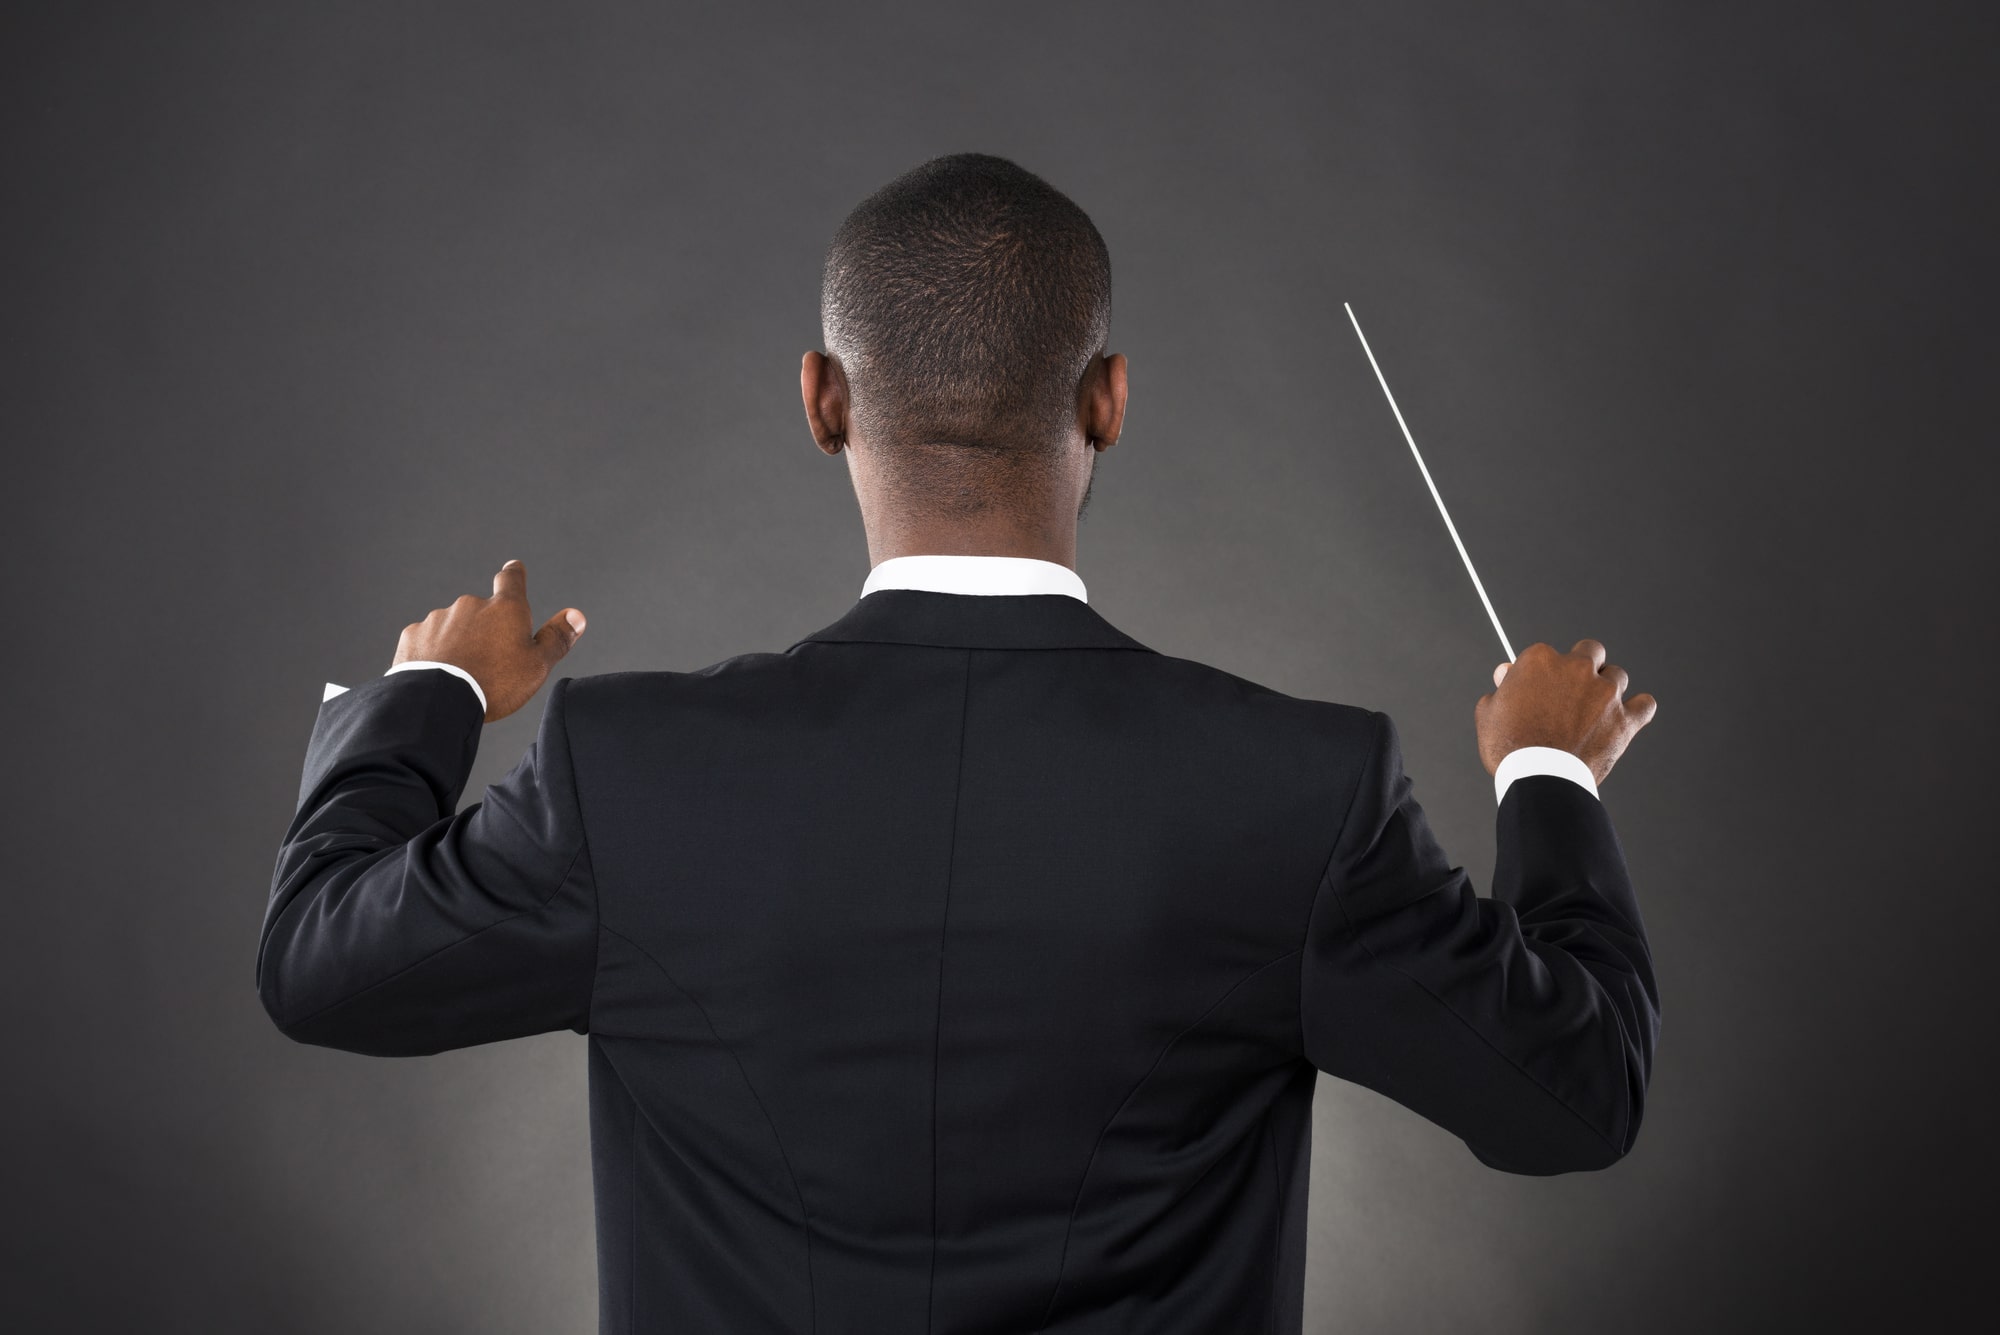 A conductor strikes up the band and shows how to create a simple employee training strategy